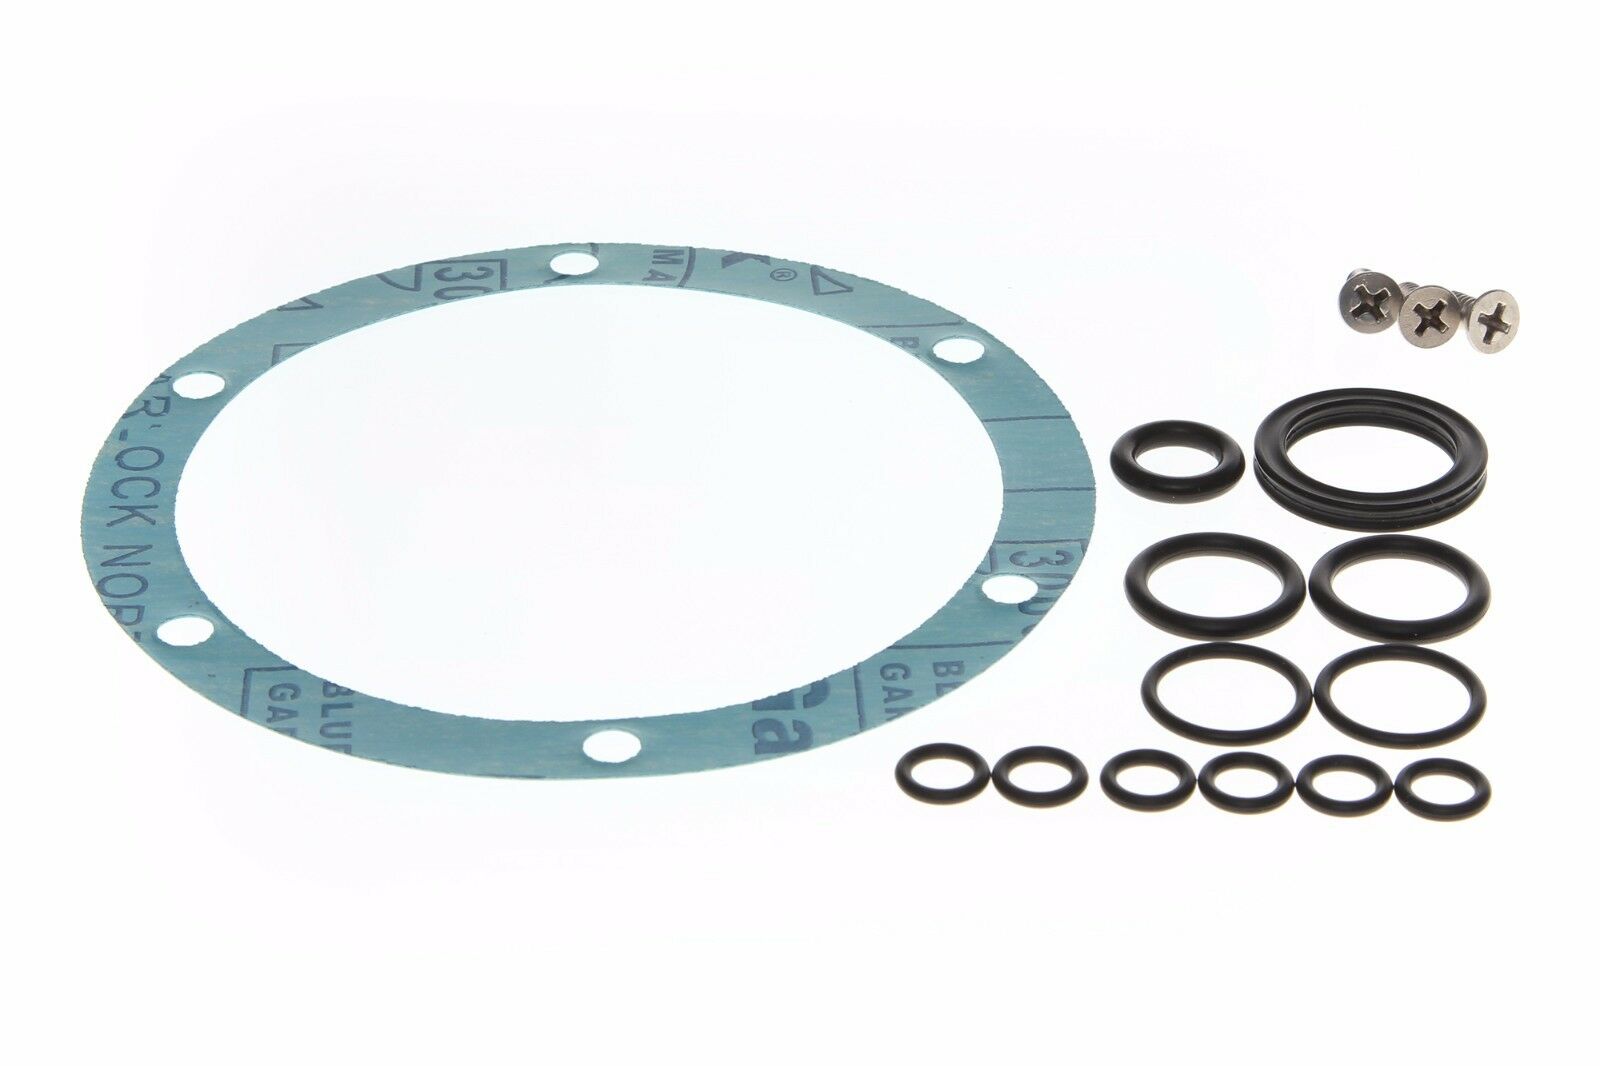 Hydraulic Helm Seal Kit Replaces Hs5176 Fits Hh-5271 -5272 -5741 -5742 & -5750